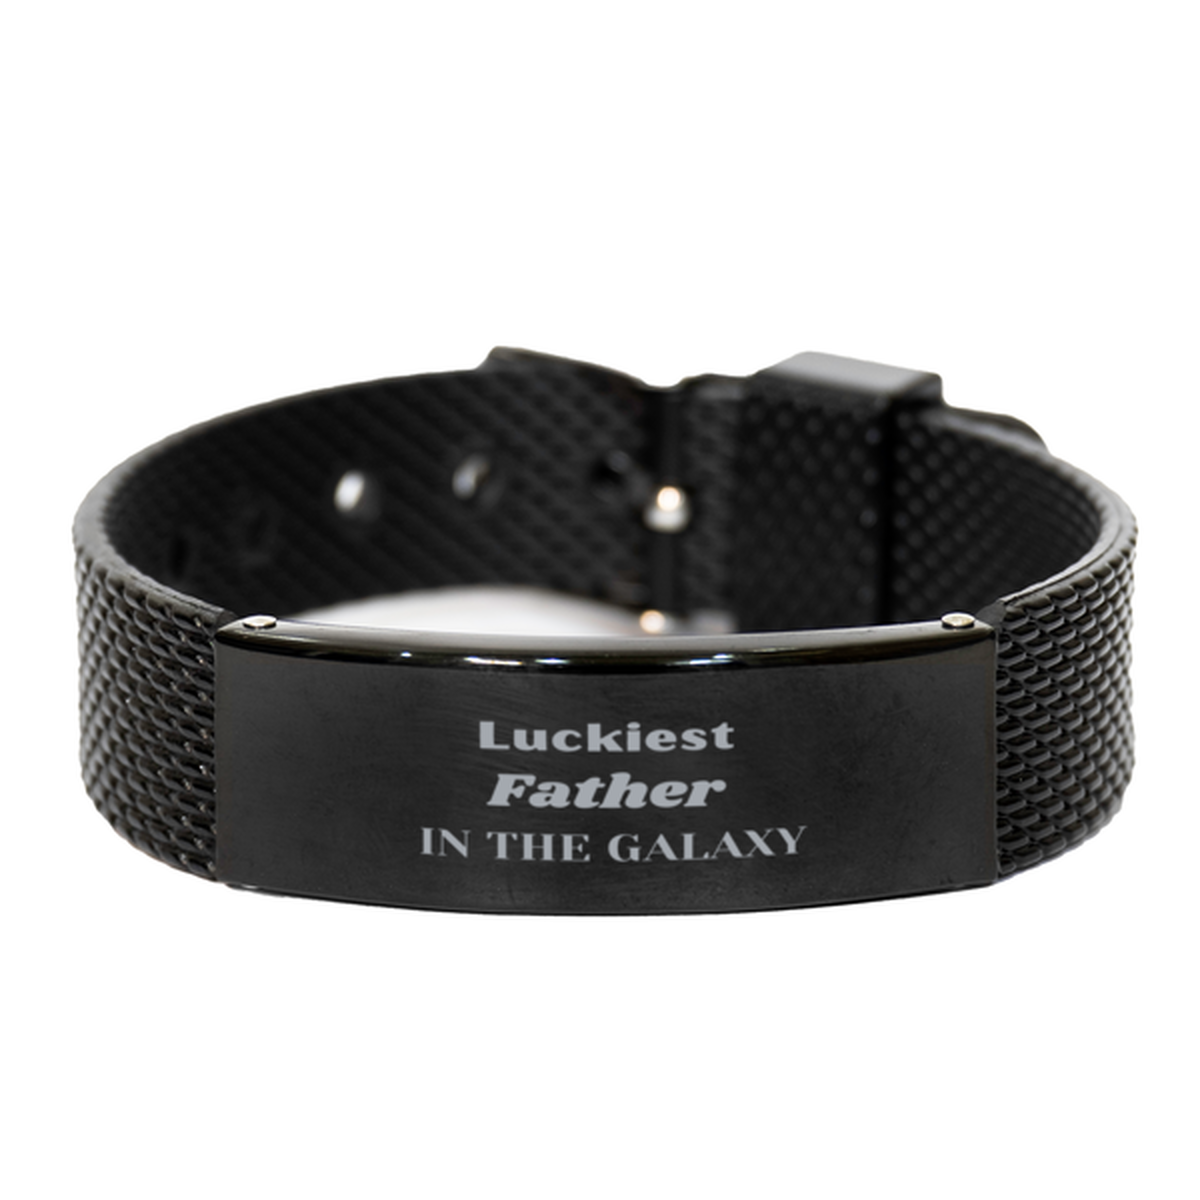 Luckiest Father in the Galaxy, To My Father Engraved Gifts, Christmas Father Black Shark Mesh Bracelet Gifts, X-mas Birthday Unique Gifts For Father Men Women